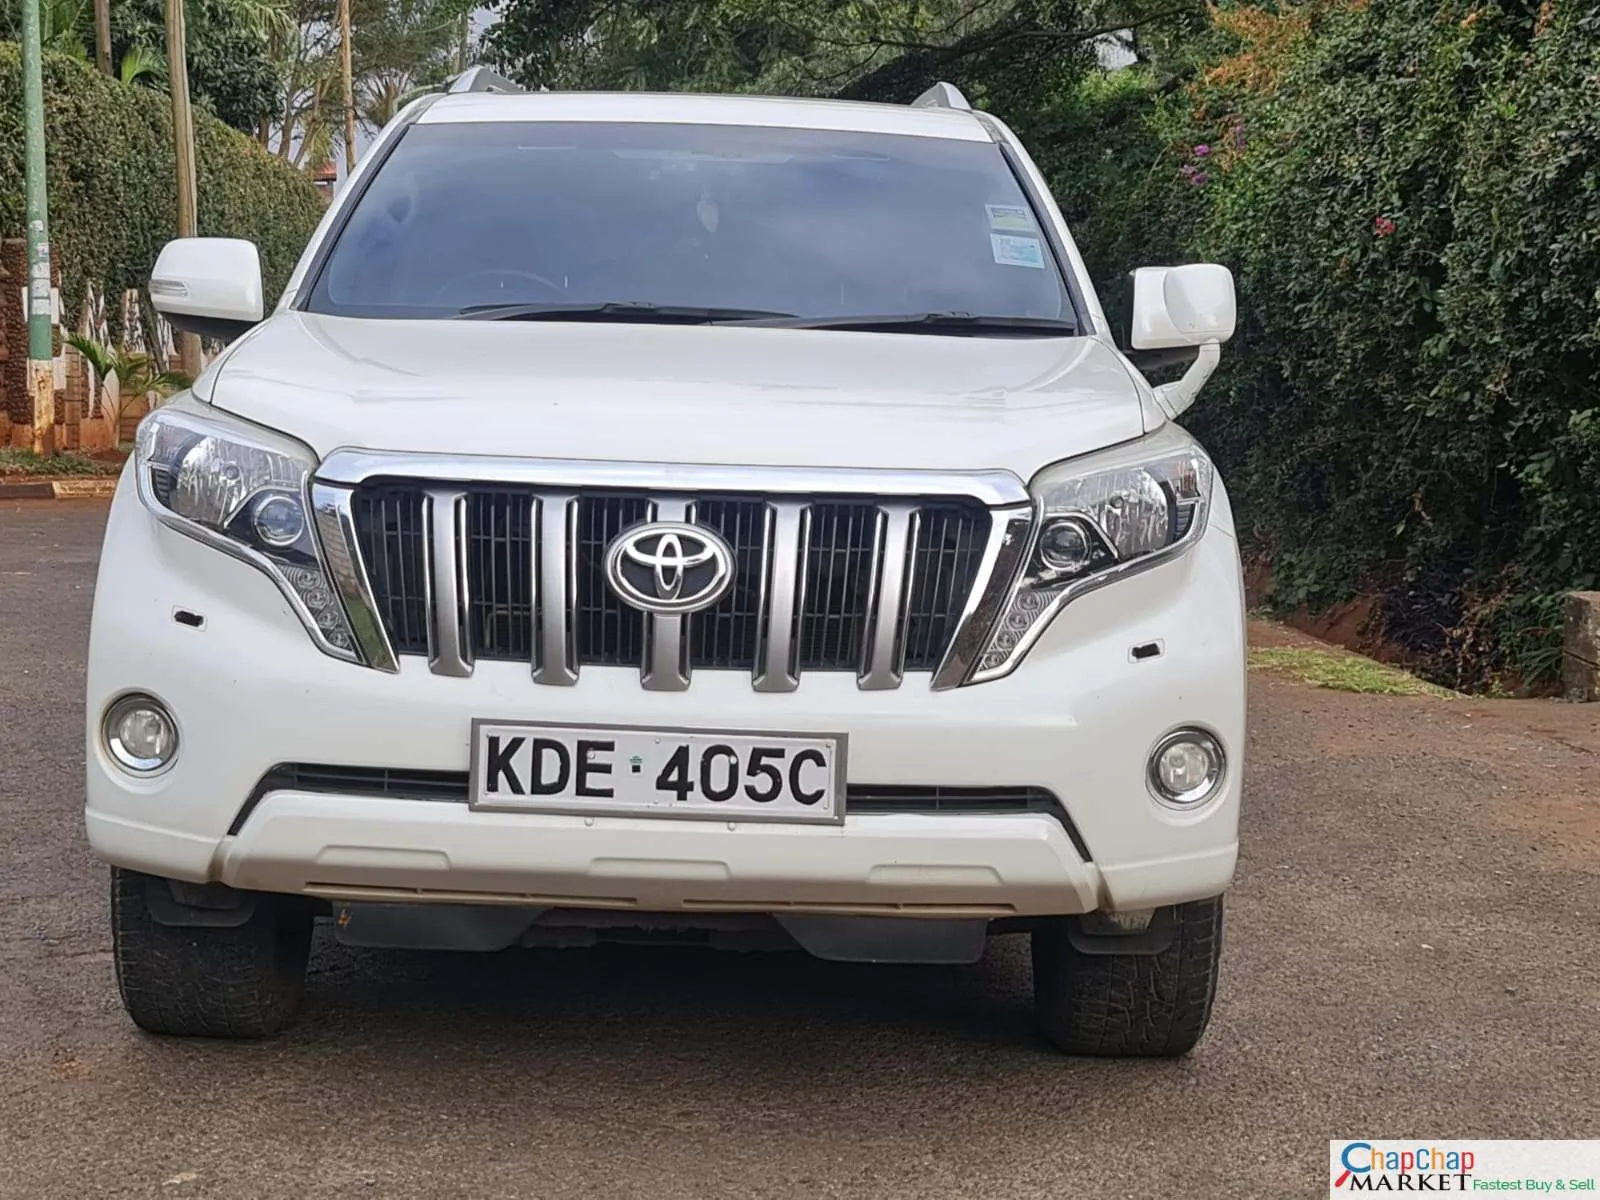 Toyota Prado j150 for sale in Kenya with SUNROOF 2015 3.6M You Pay 30% Deposit Trade in OK exclusive (SOLD)